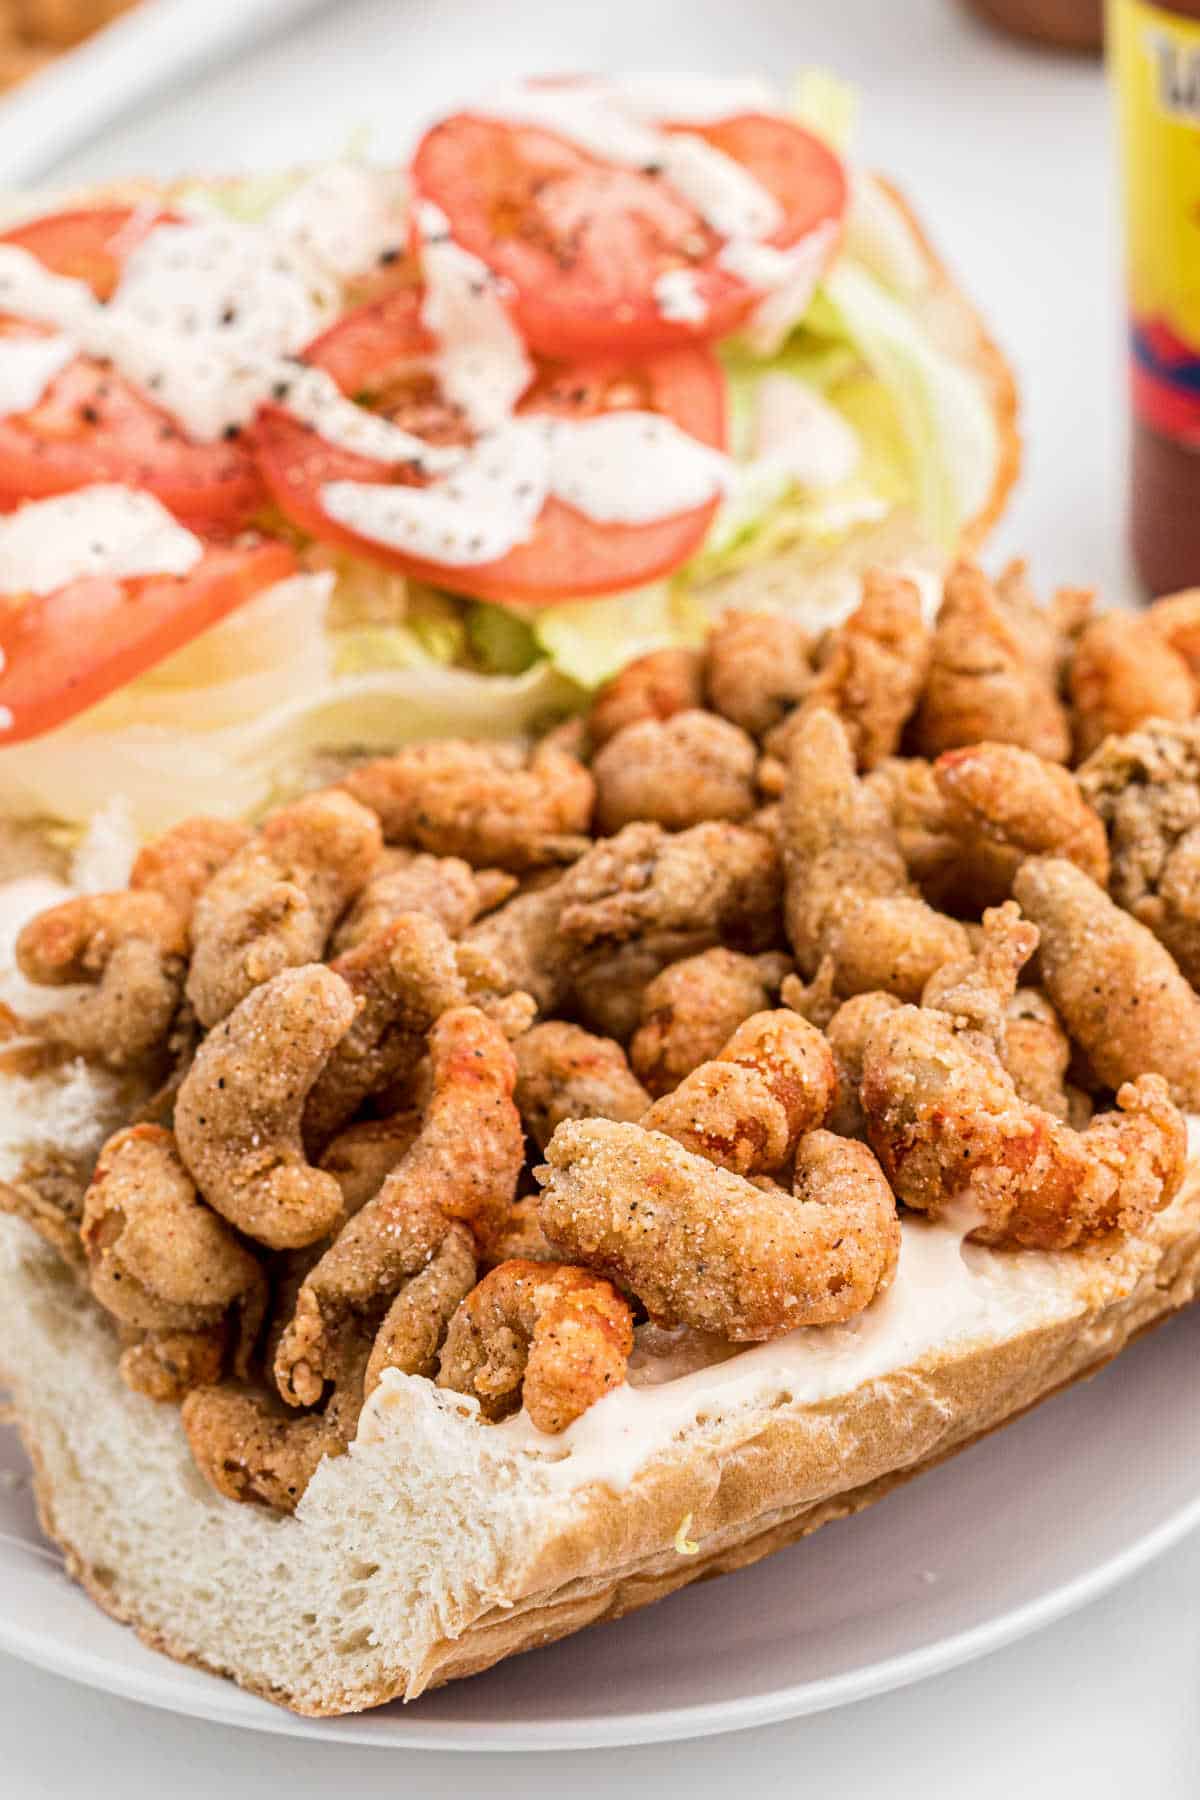 Side view of a fried crawfish poboy.